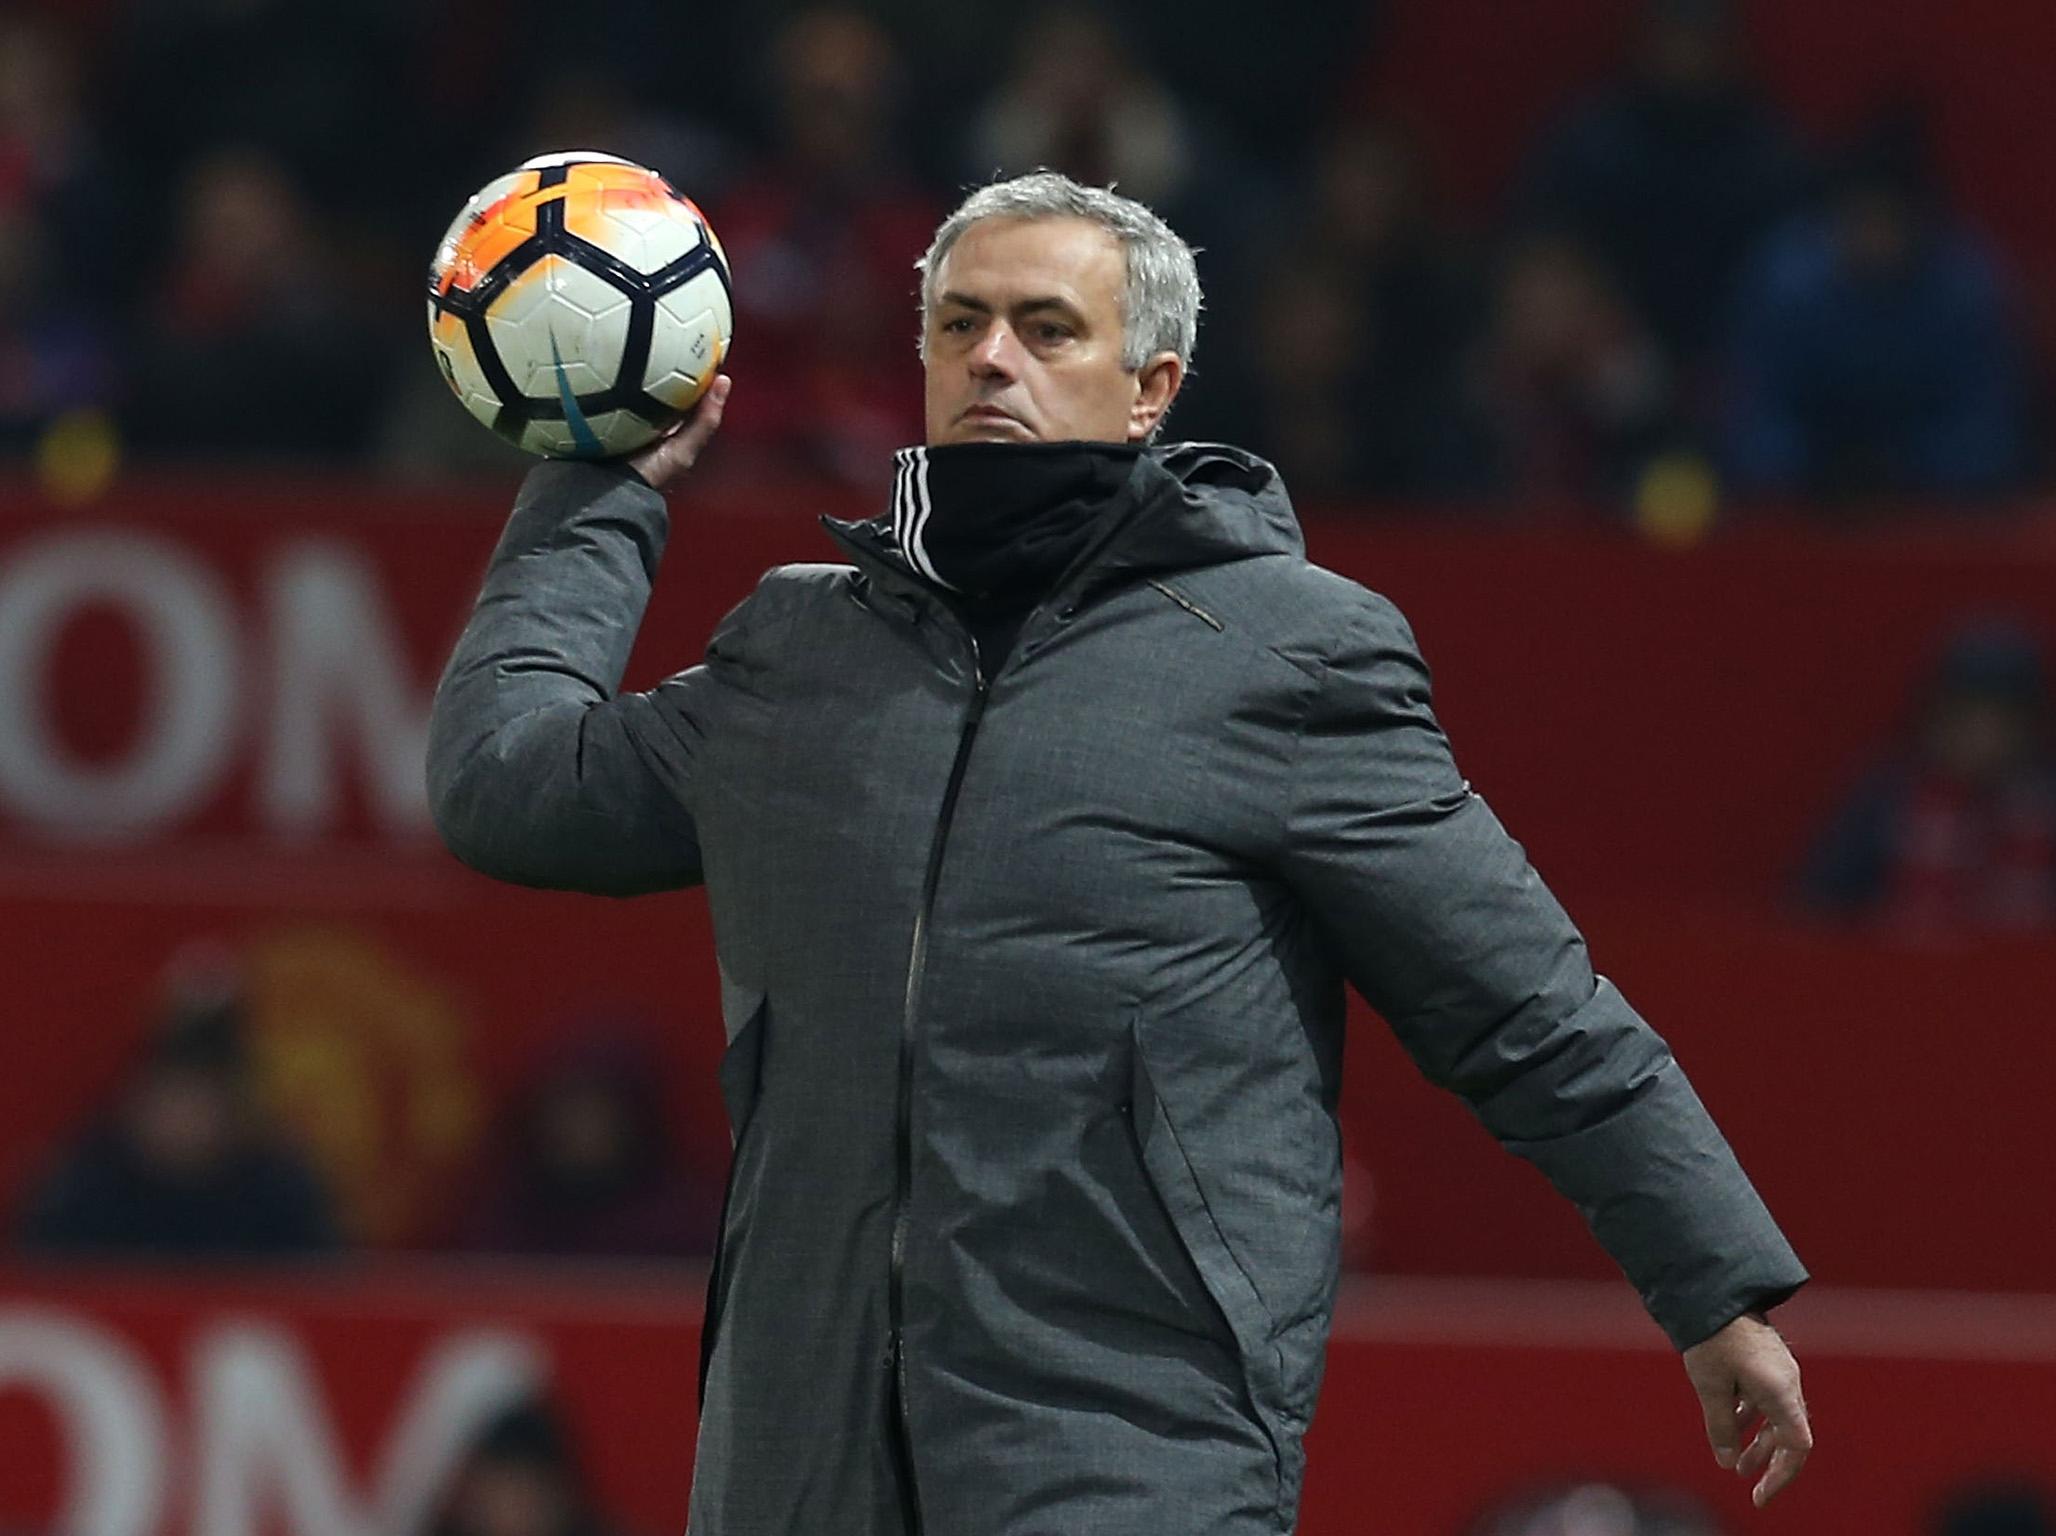 Mourinho is set to sign an extension at Old Trafford